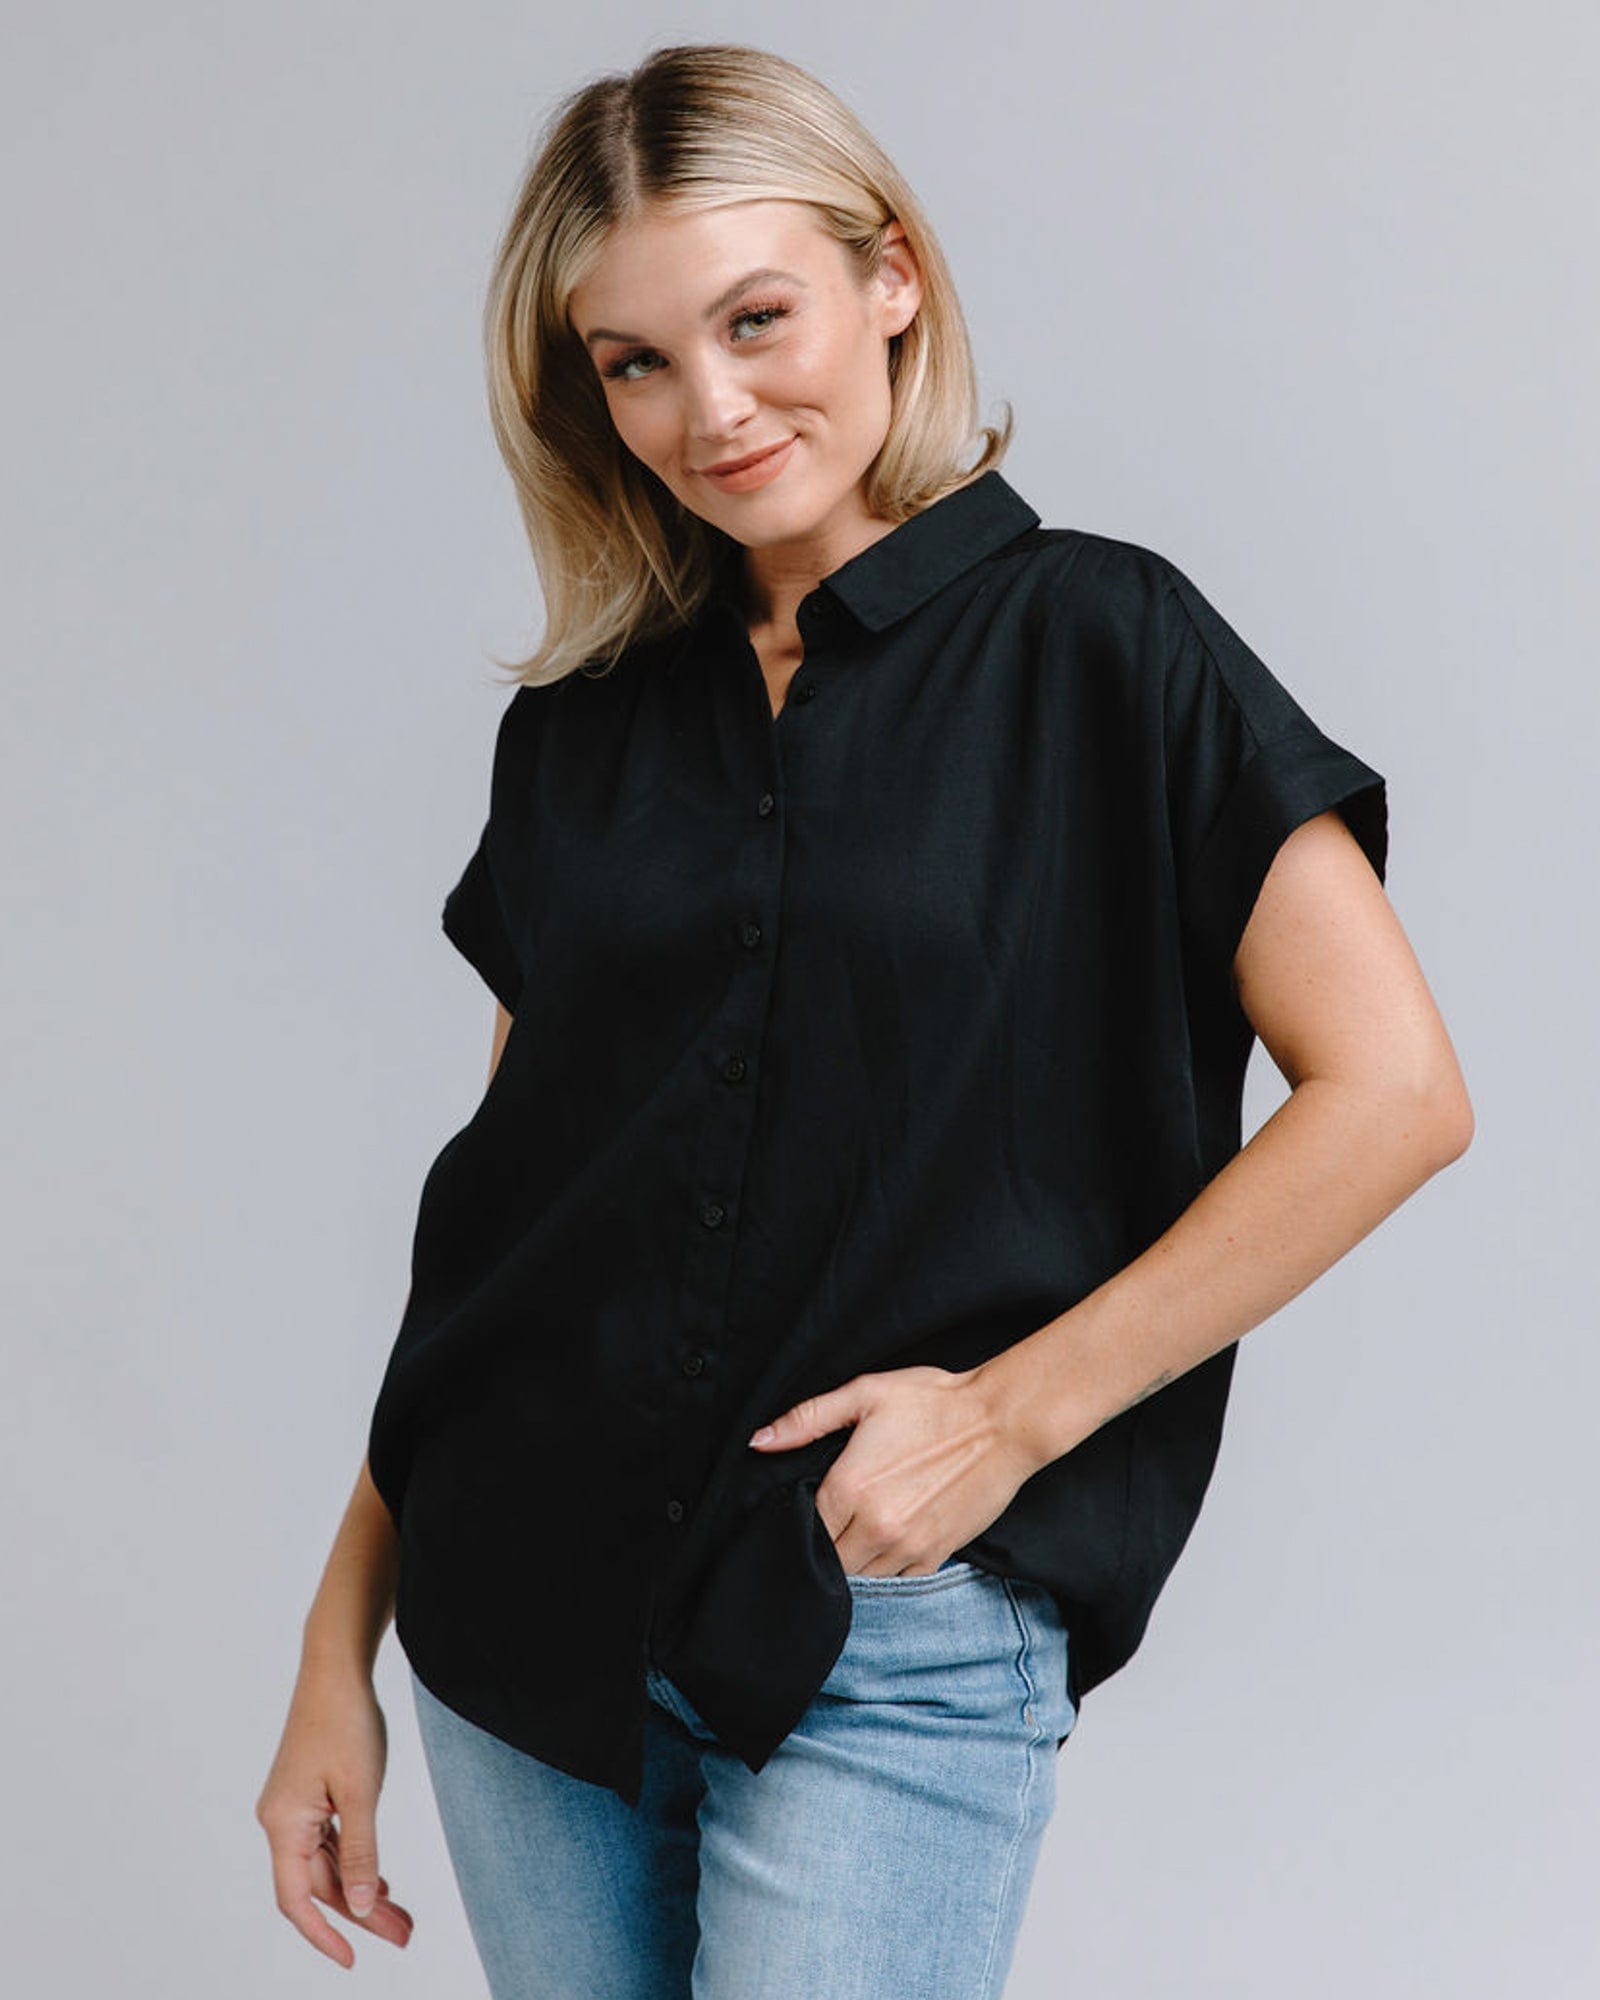 Woman in a short sleeve, collared, loose fitting black top